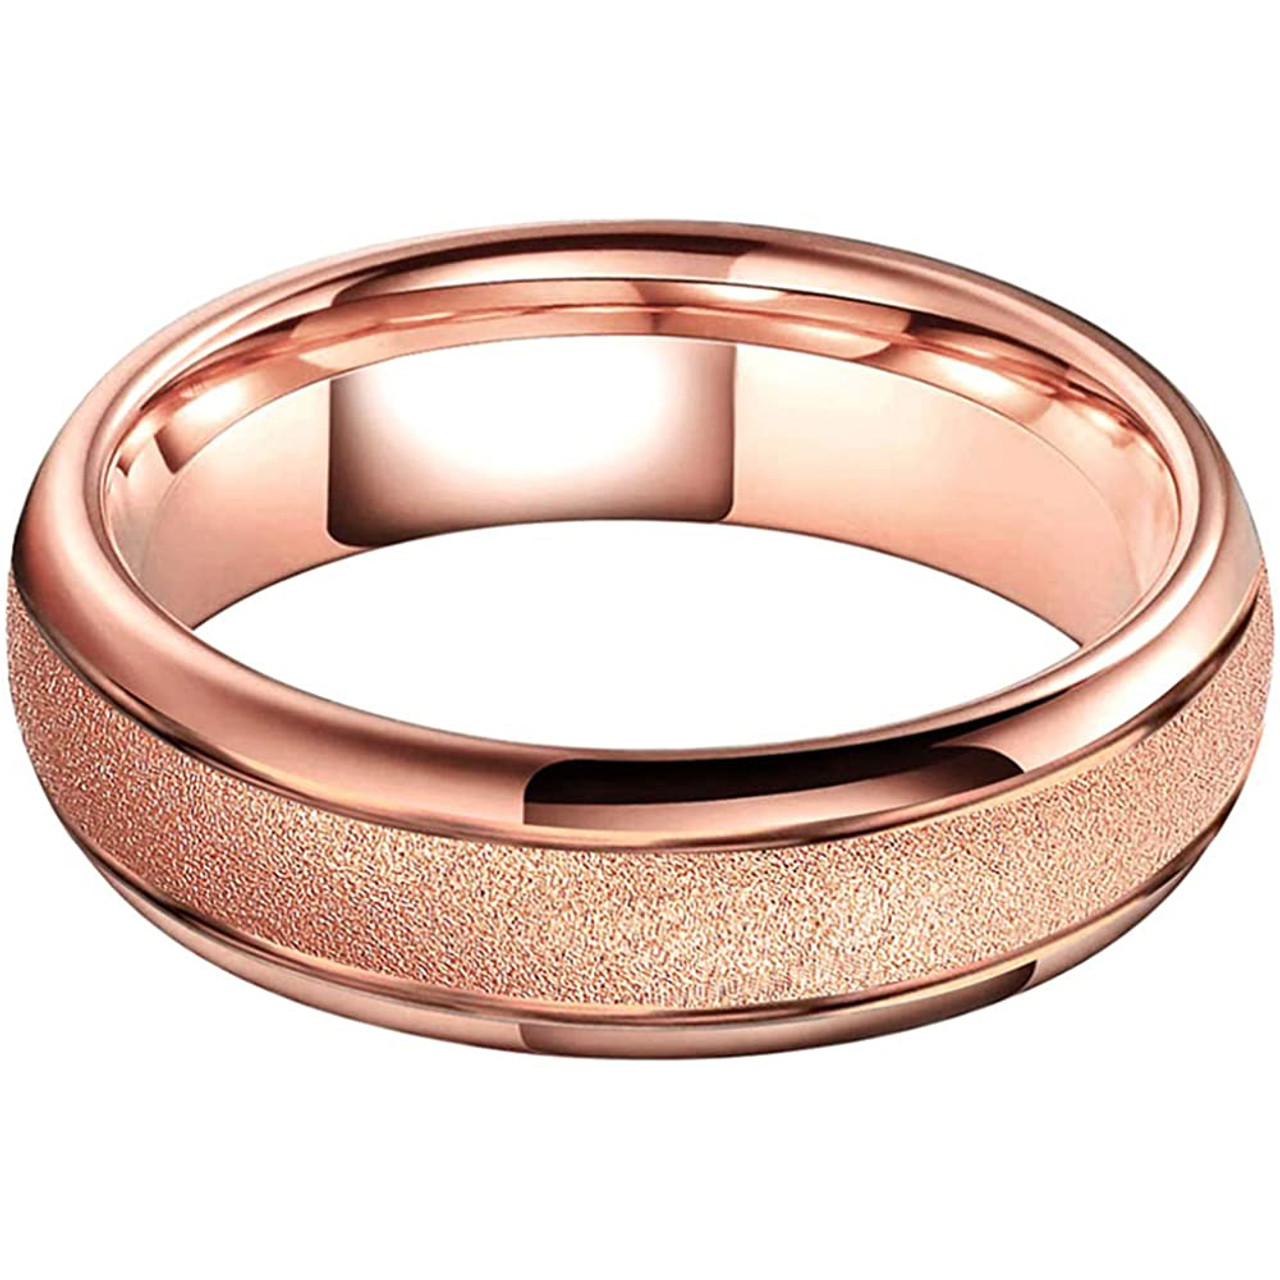 (6mm) Unisex or Women's Tungsten Carbide Wedding Ring Band. Rose Gold Domed Top Ring. Sand Blasted Glitter Design with High Polish Edges. Comfort Fit.